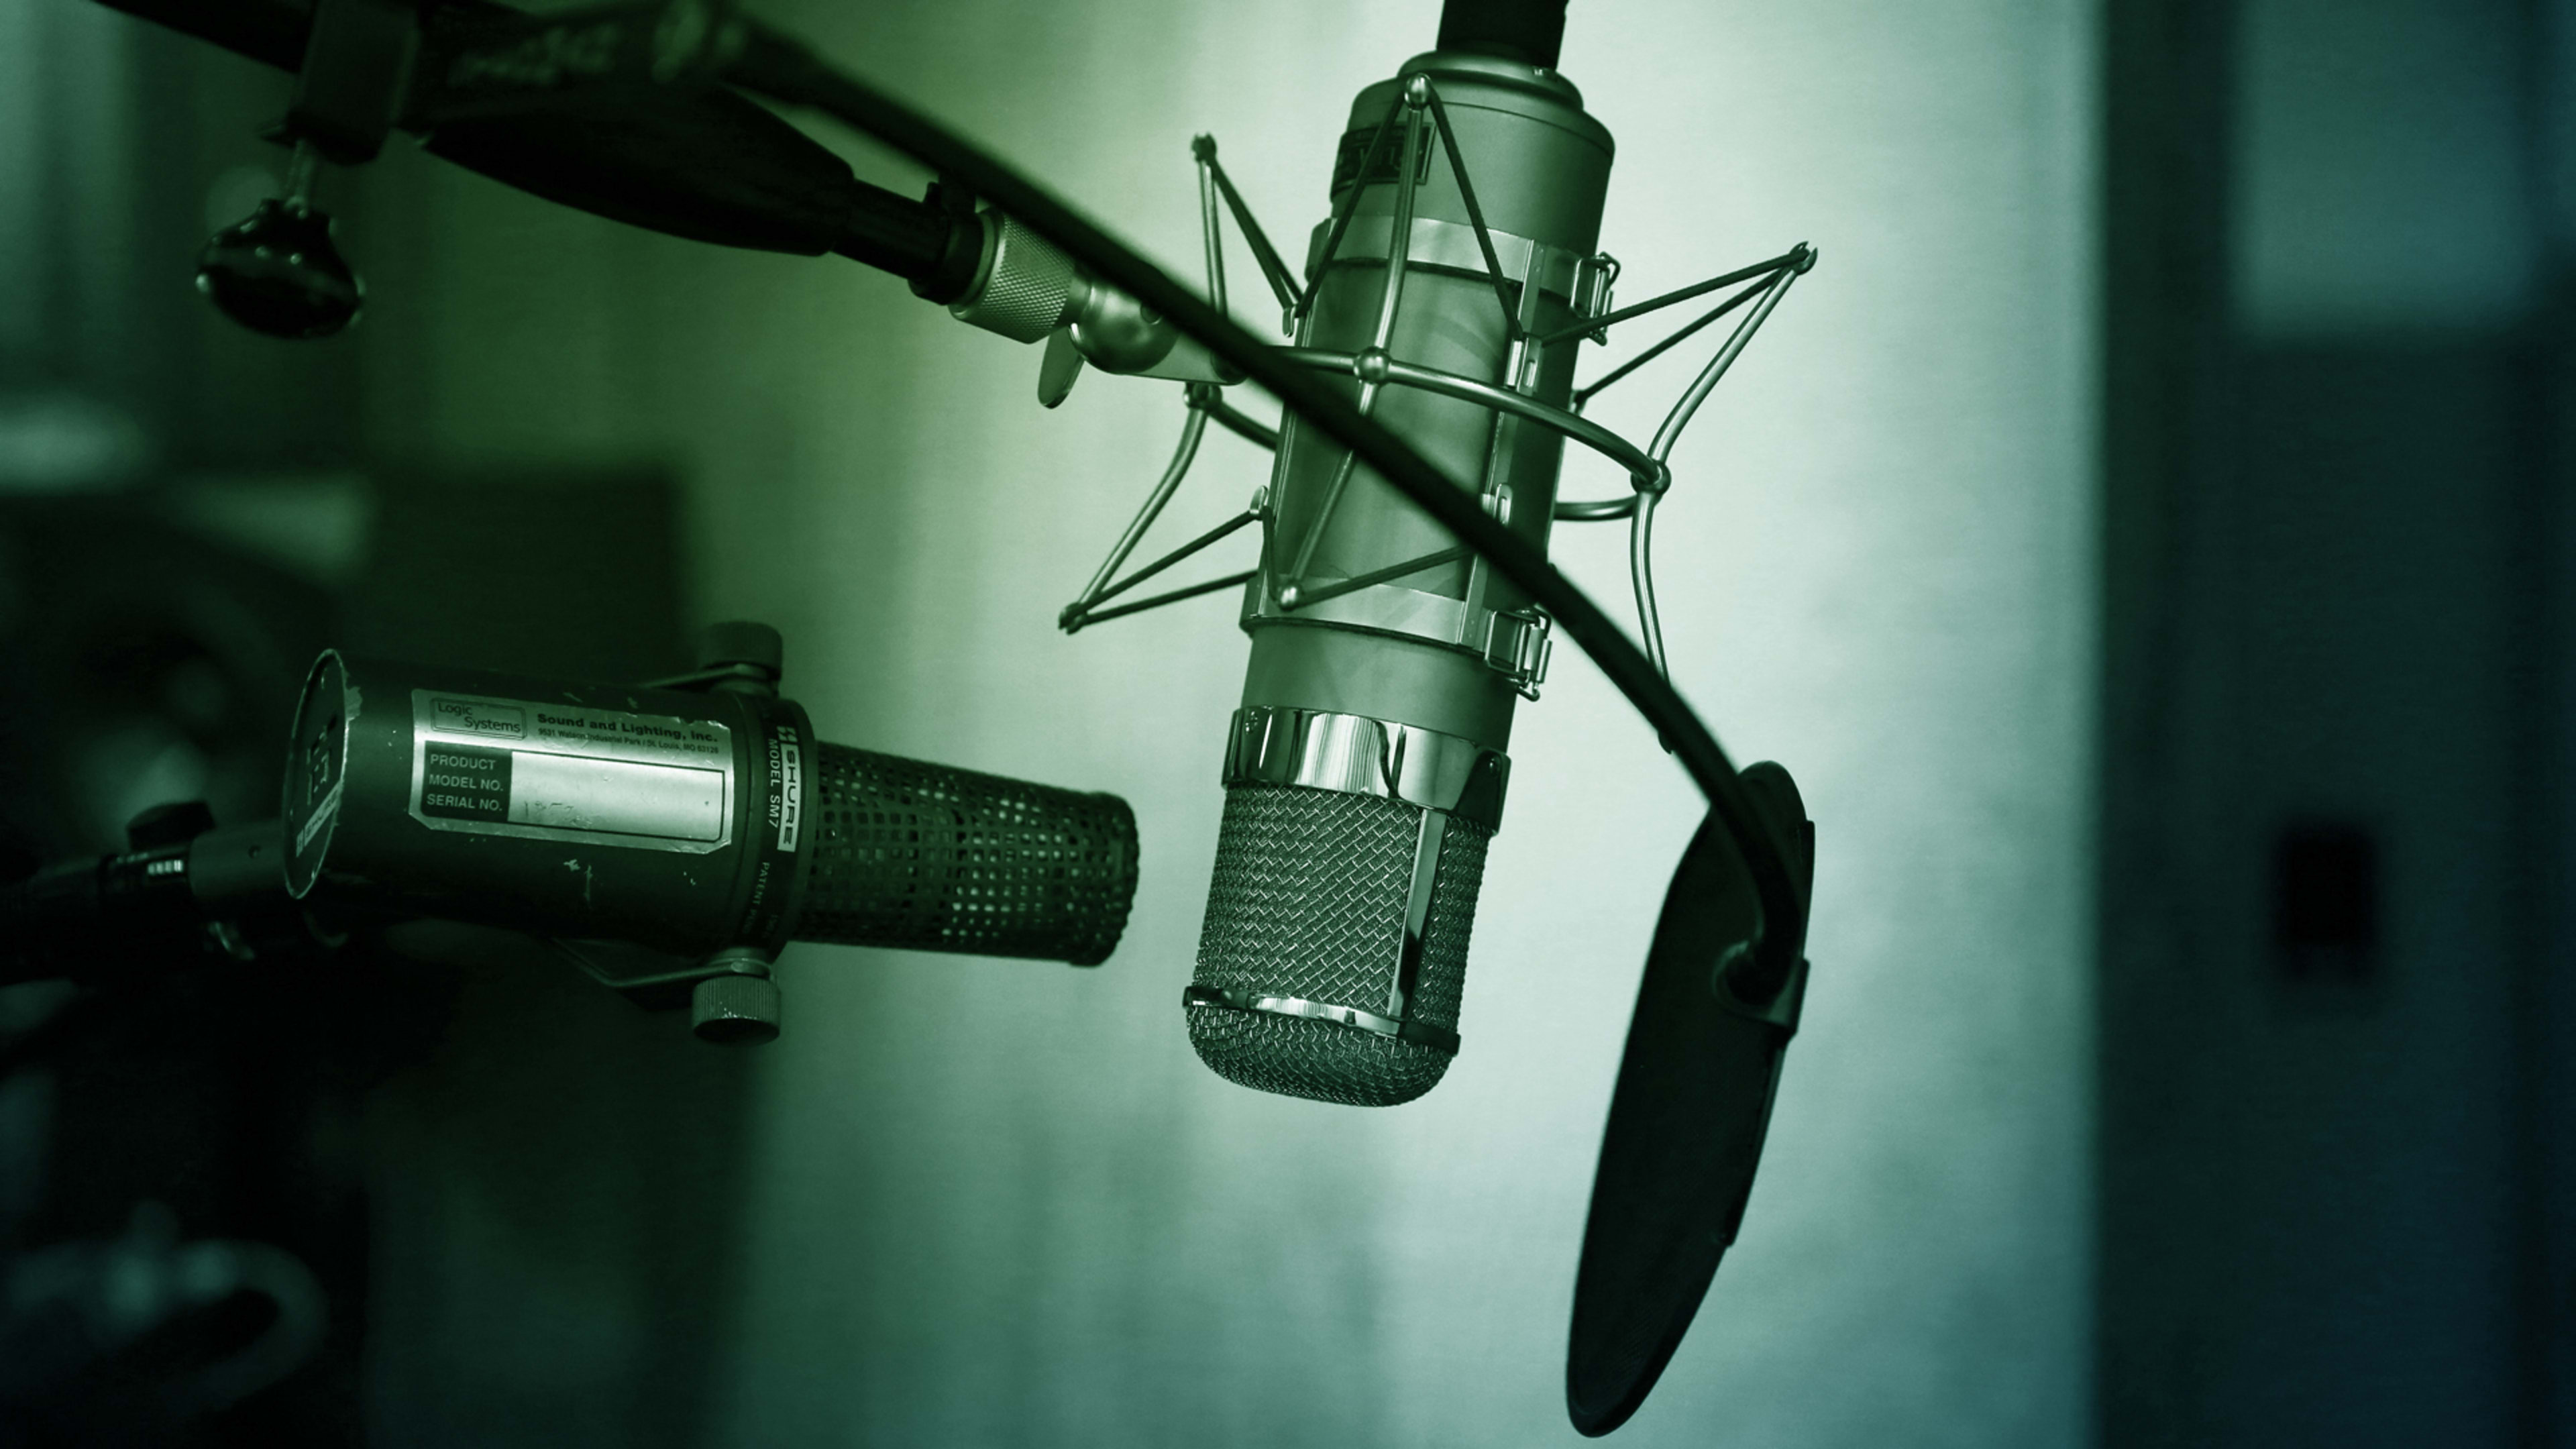 Ad revenue from podcasts is skyrocketing, up 86% from 2016